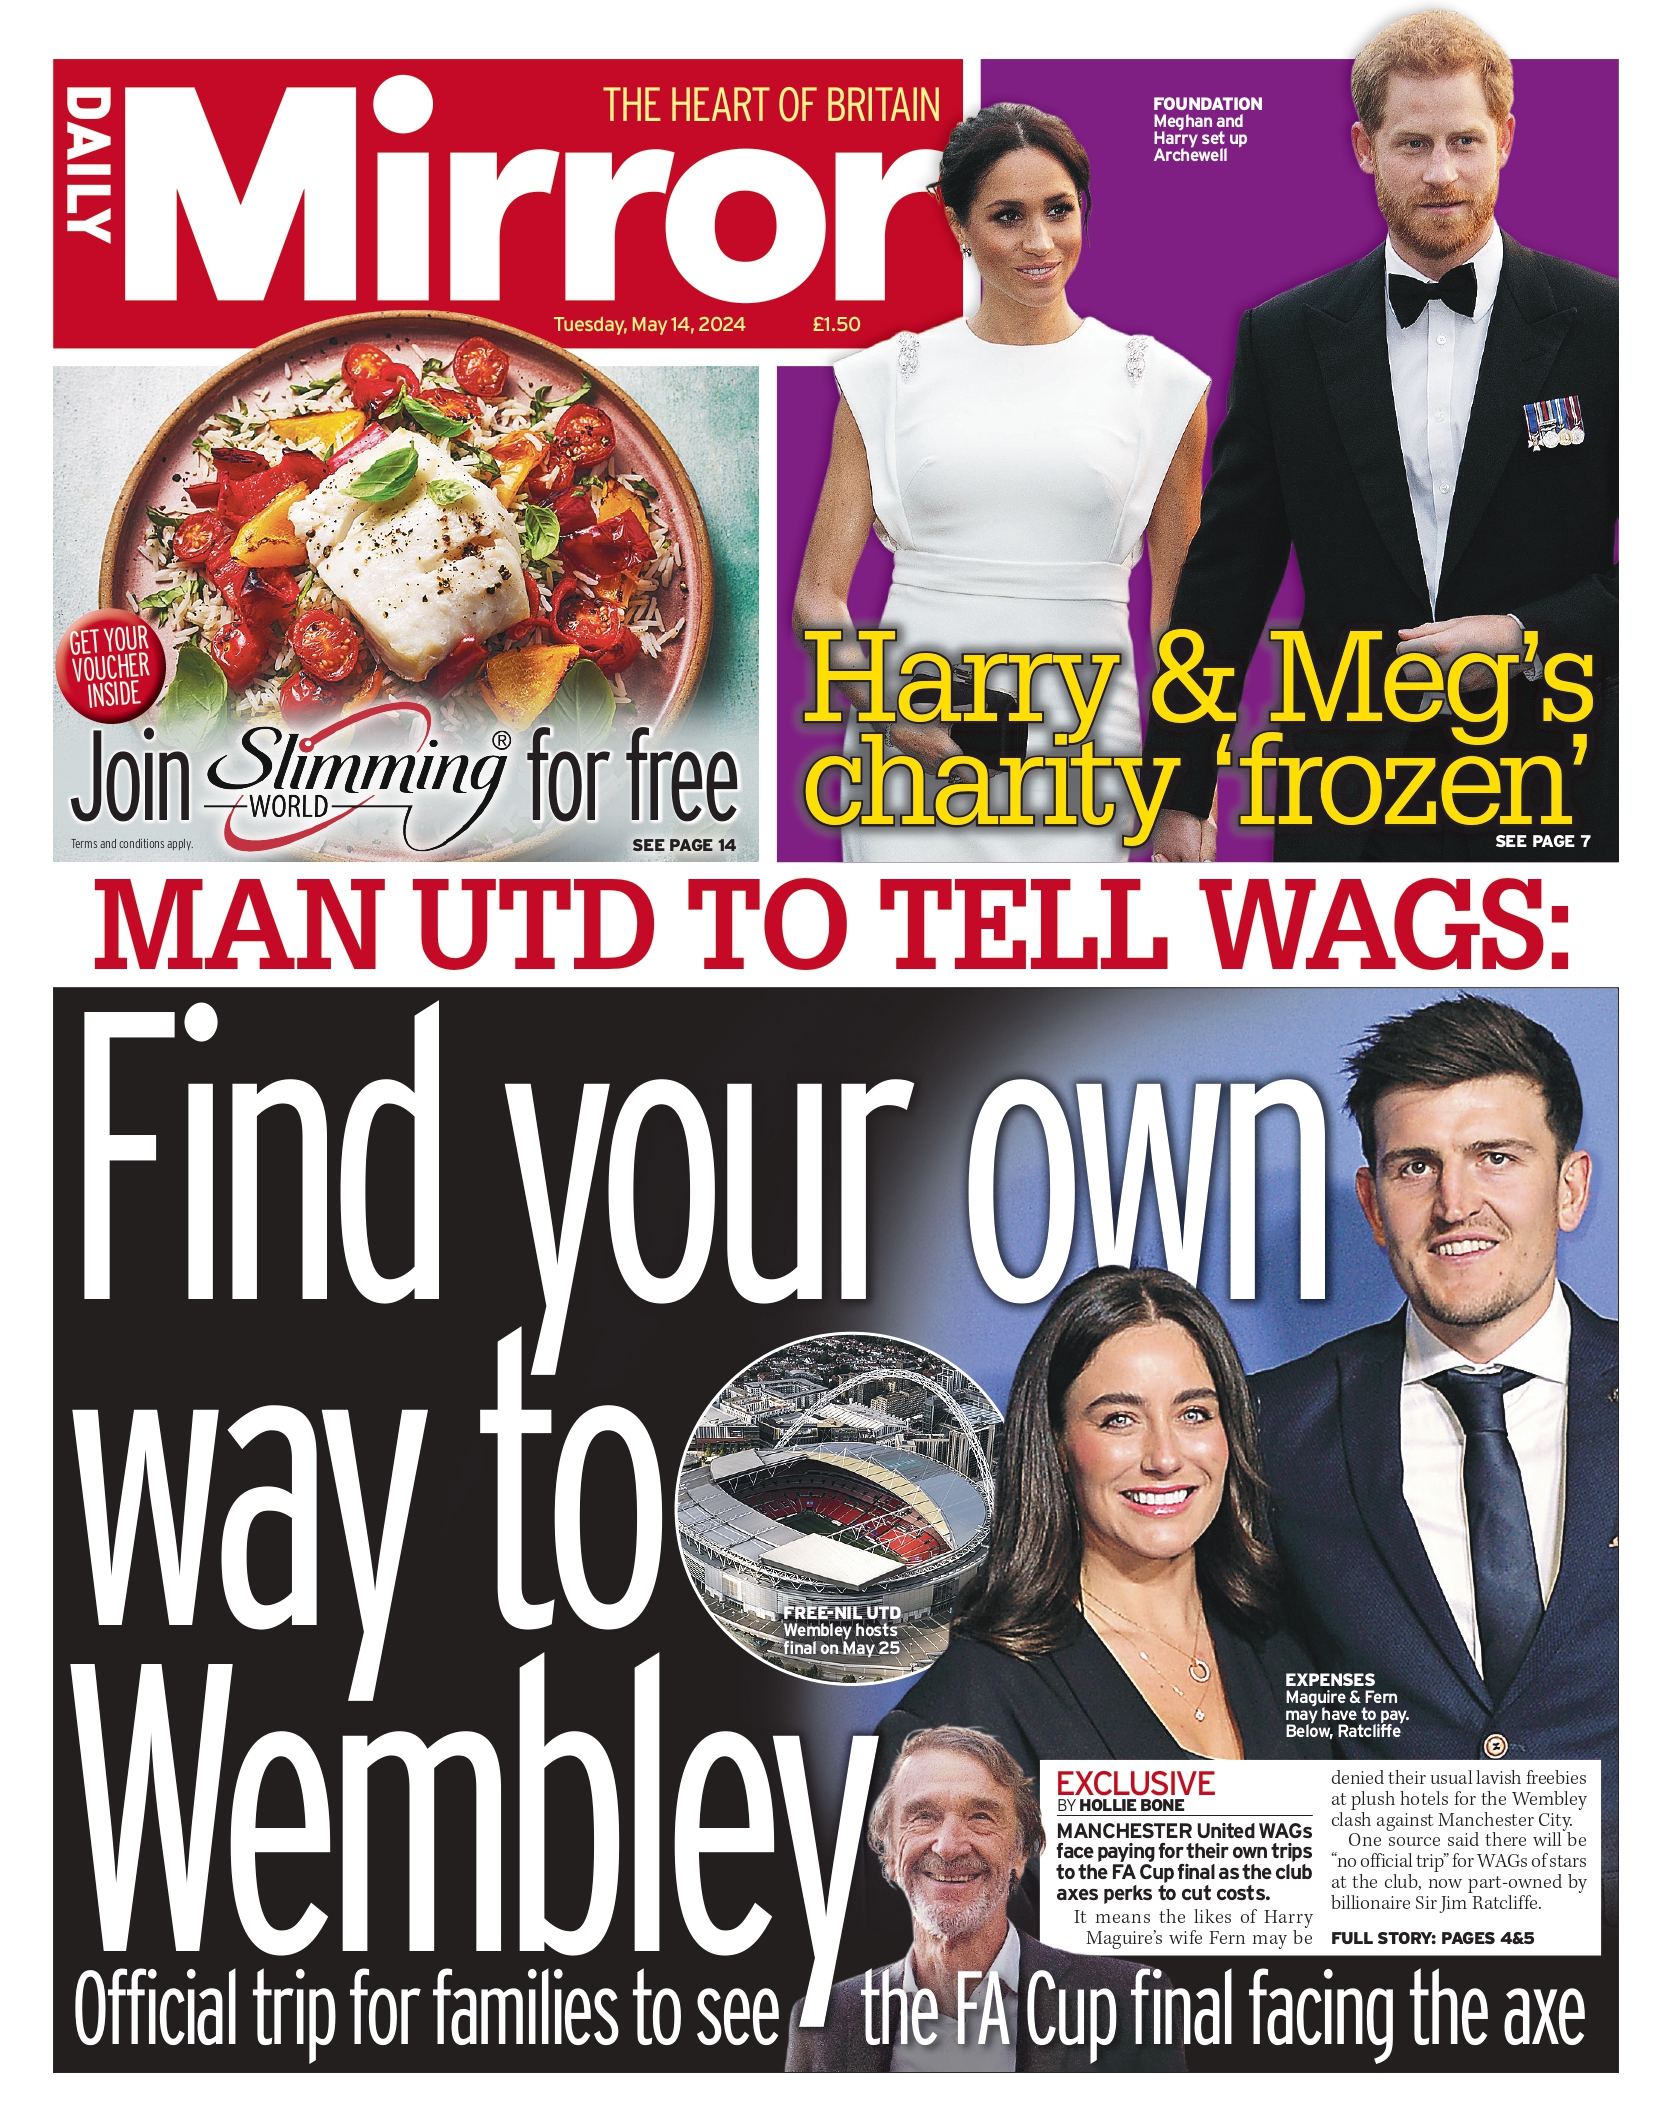 Tuesday's front page: Find your own way to Wembley https://www.mirror.co.uk/sport/football/manchester-united-wags-lavish-freebie-32801419 #TomorrowsPapersToday 